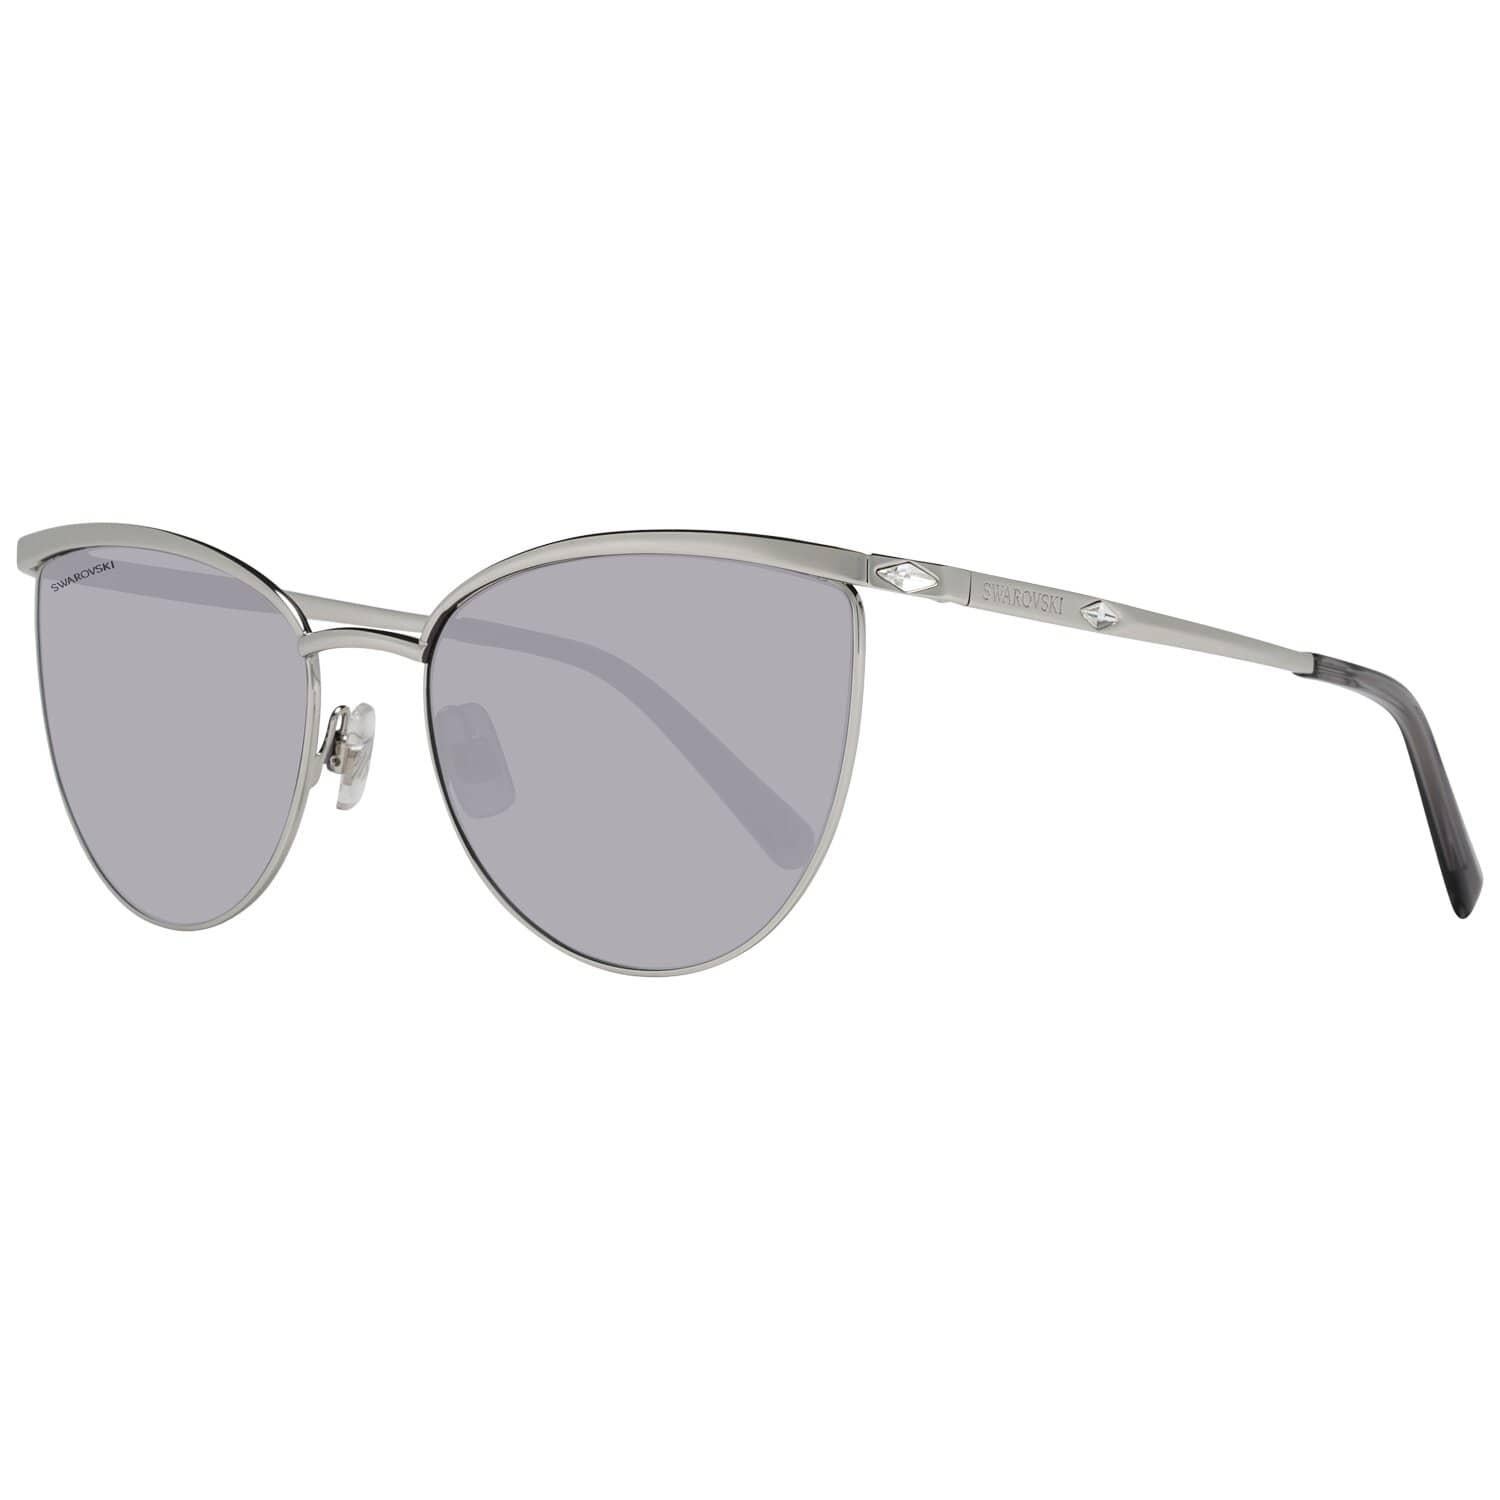 DetailsMATERIAL: MetalCOLOR: SilverMODEL: SK0195 5616BGENDER: WomenCOUNTRY OF MANUFACTURE: ChinaTYPE: SunglassesORIGINAL CASE?: YesSTYLE: ButterflyOCCASION: CasualFEATURES: LightweightLENS COLOR: GreyLENS TECHNOLOGY: GradientYEAR MANUFACTURED: